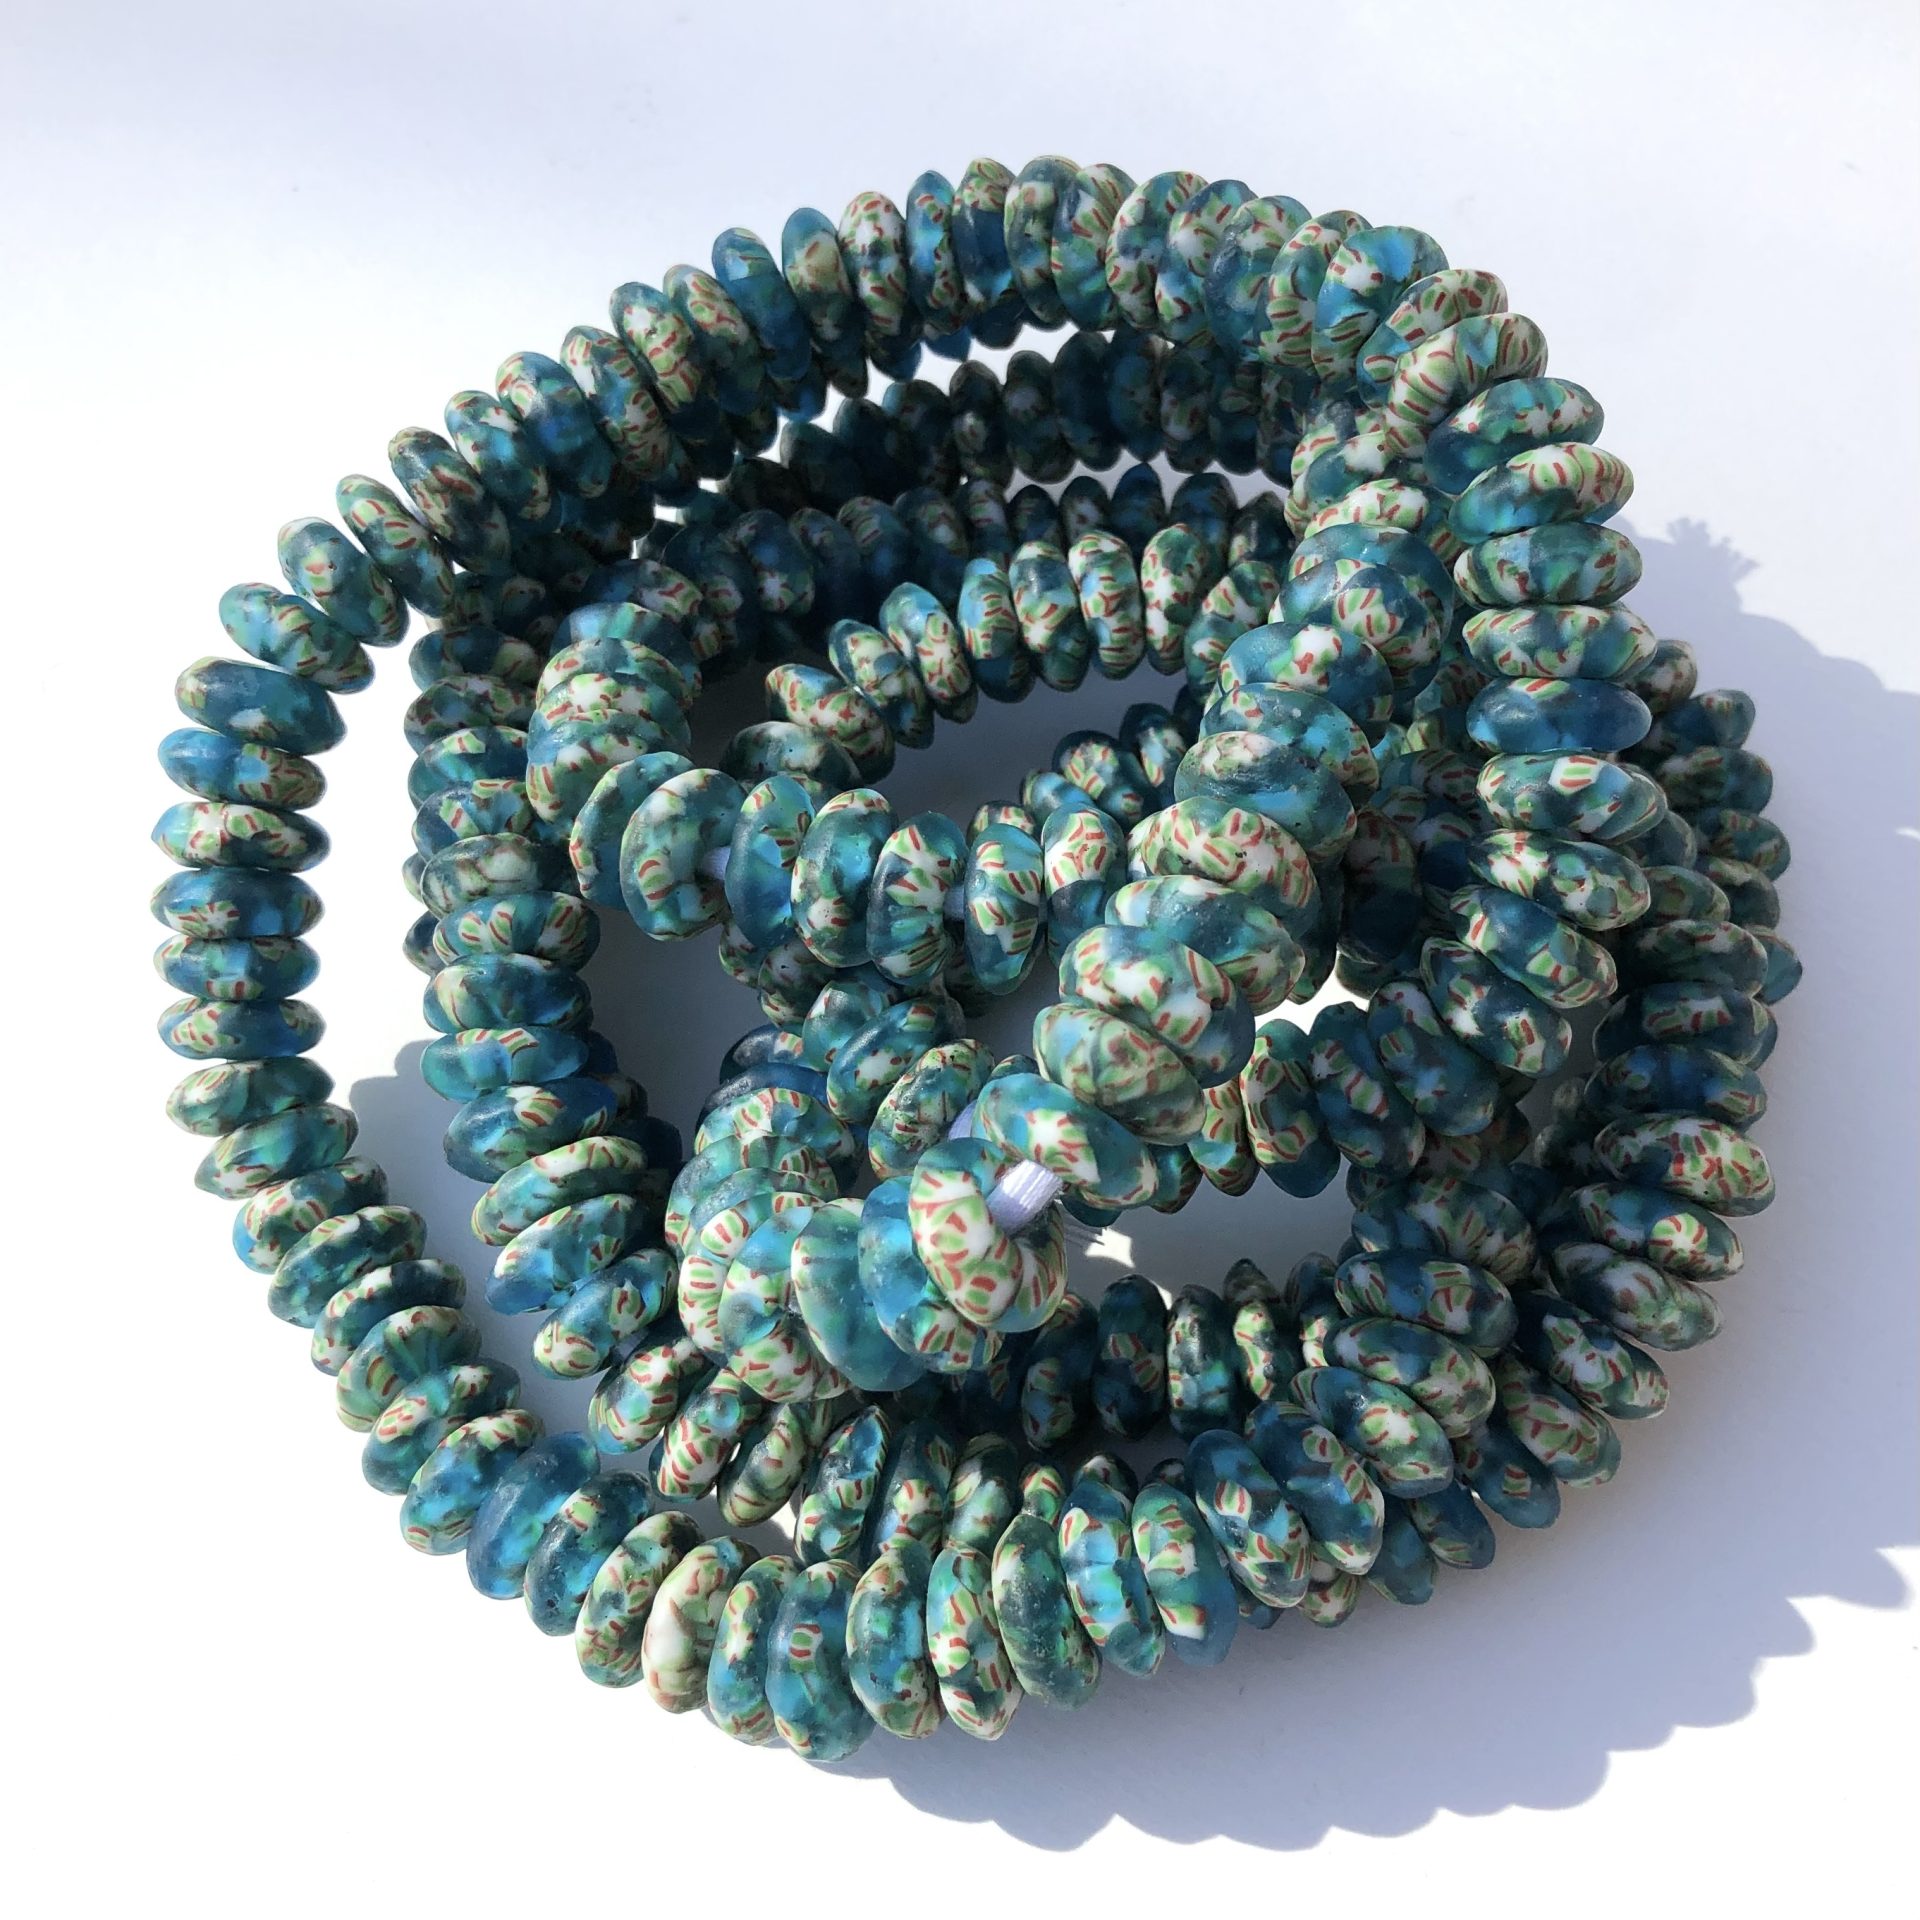 Fused Recycled Glass Beads Lifesaver